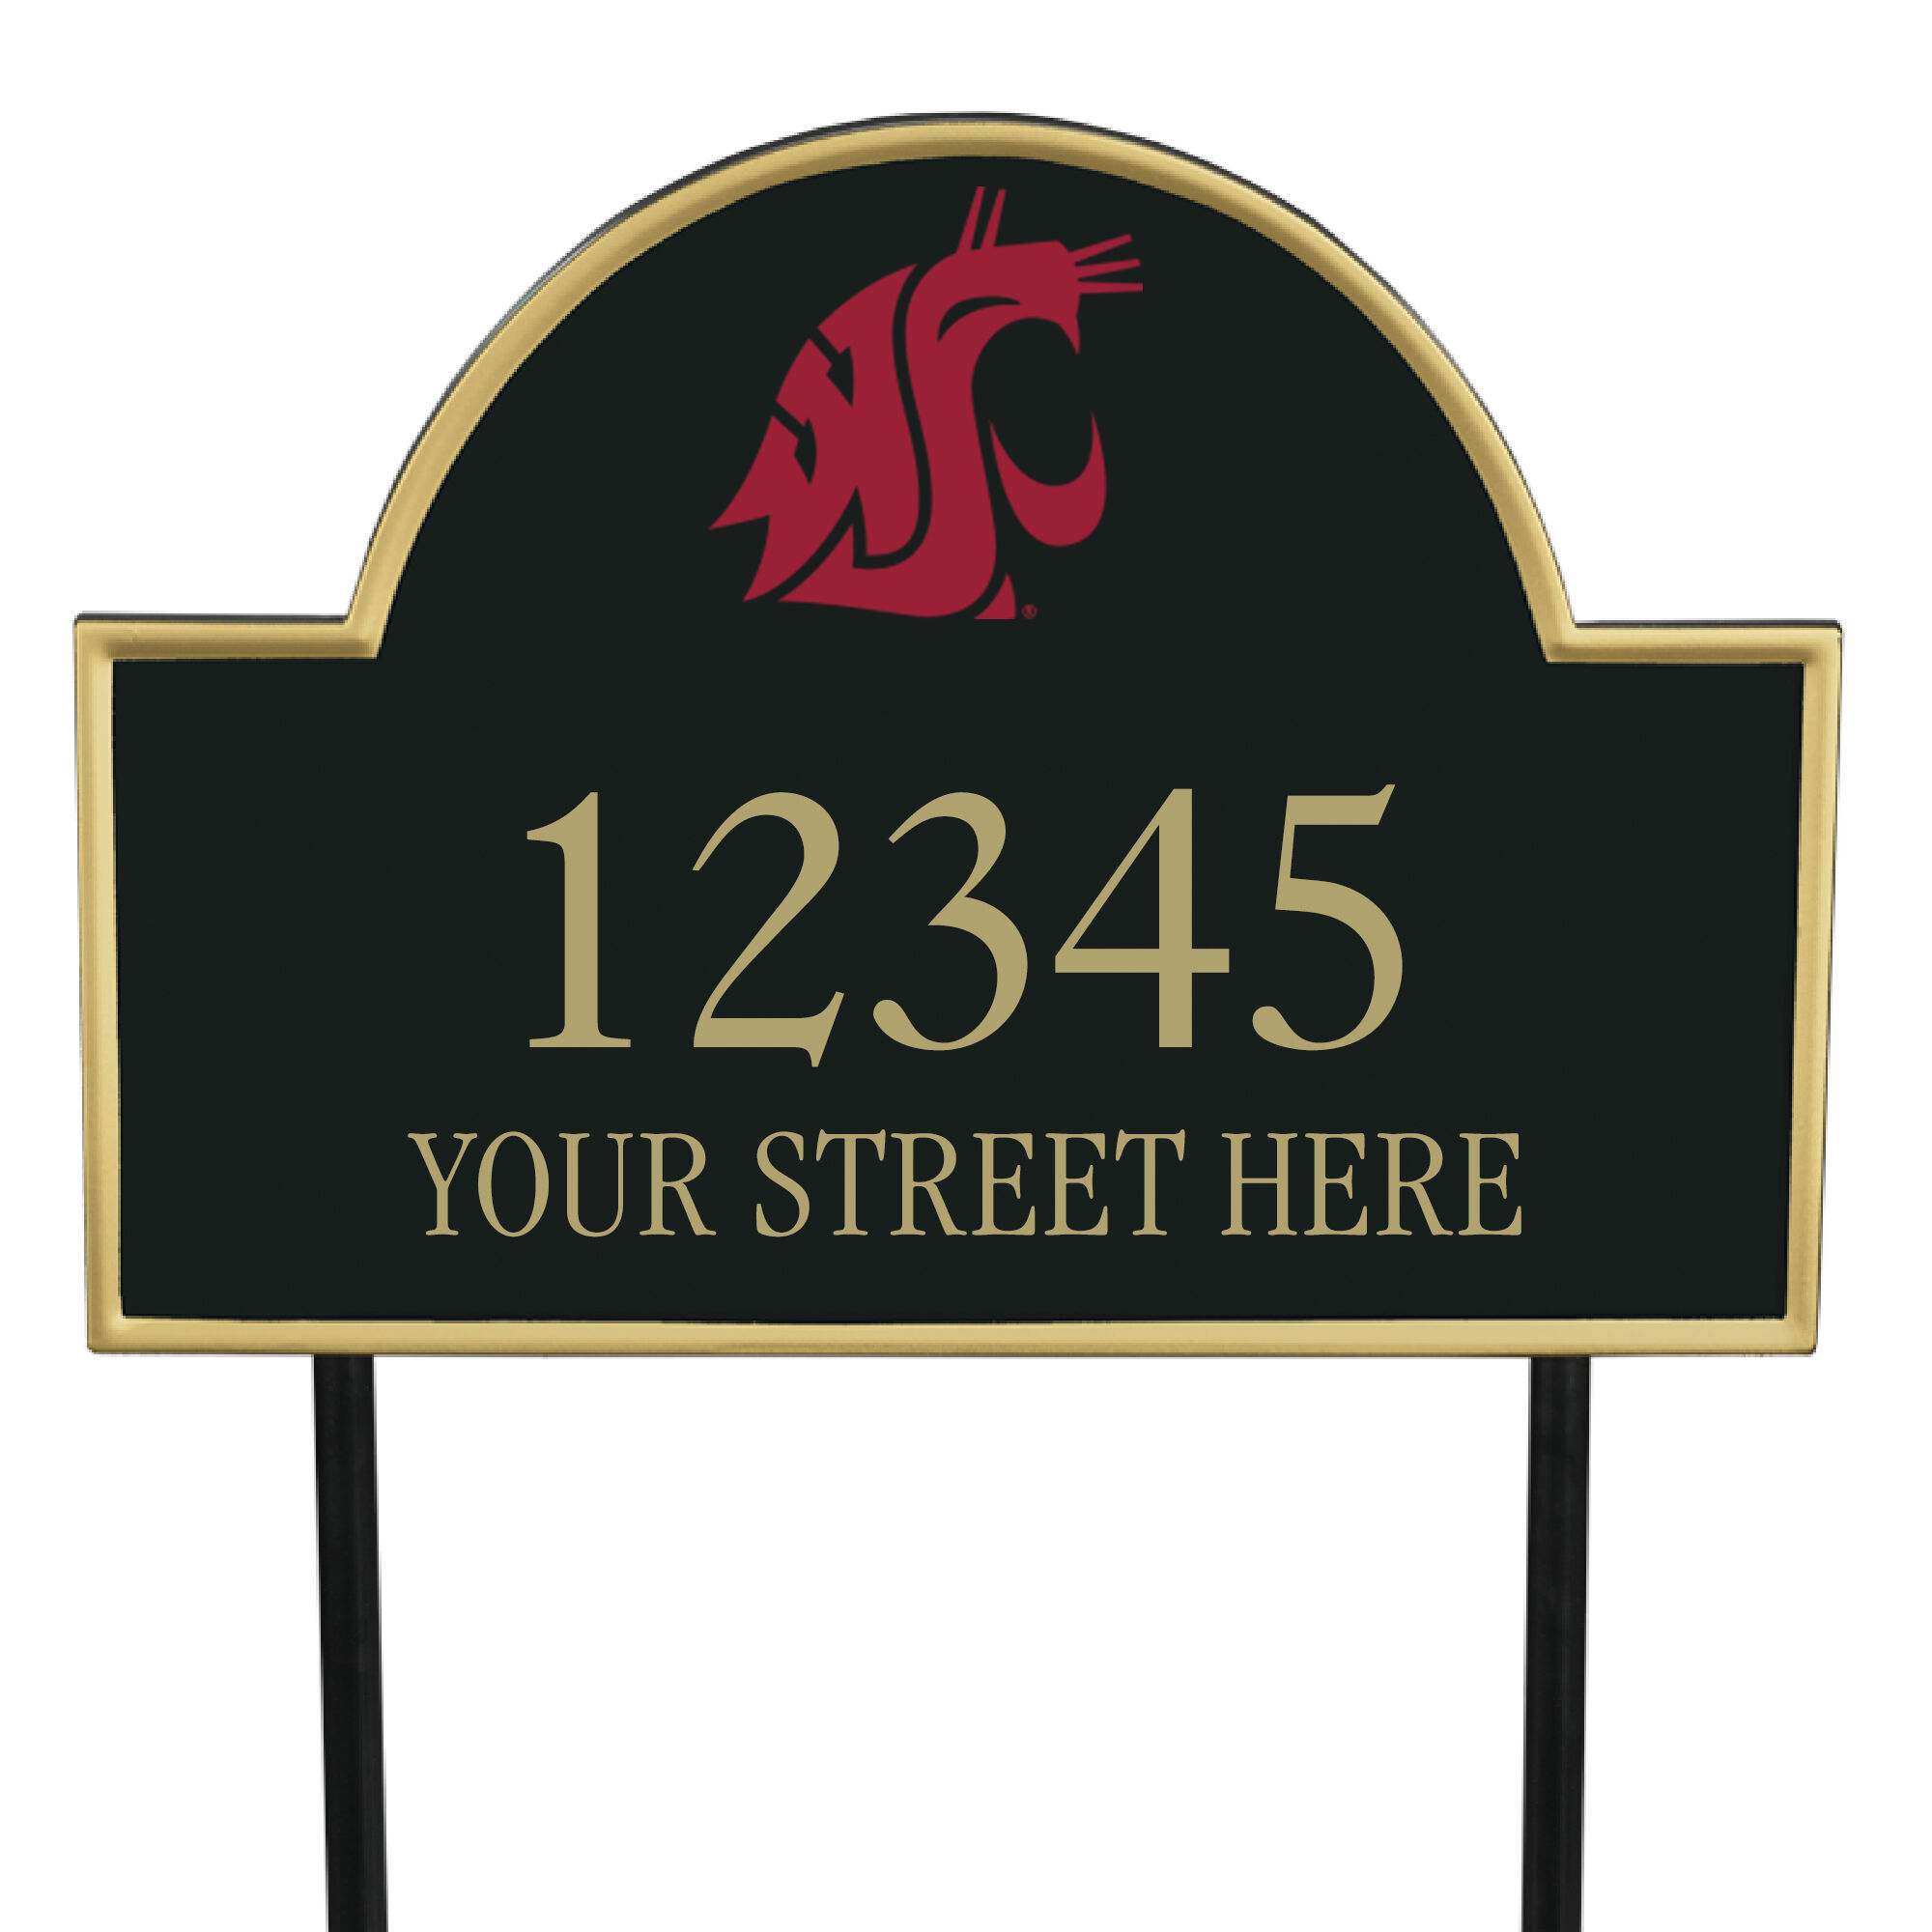 The College Personalized Address Plaque 5716 0384 b Washington State